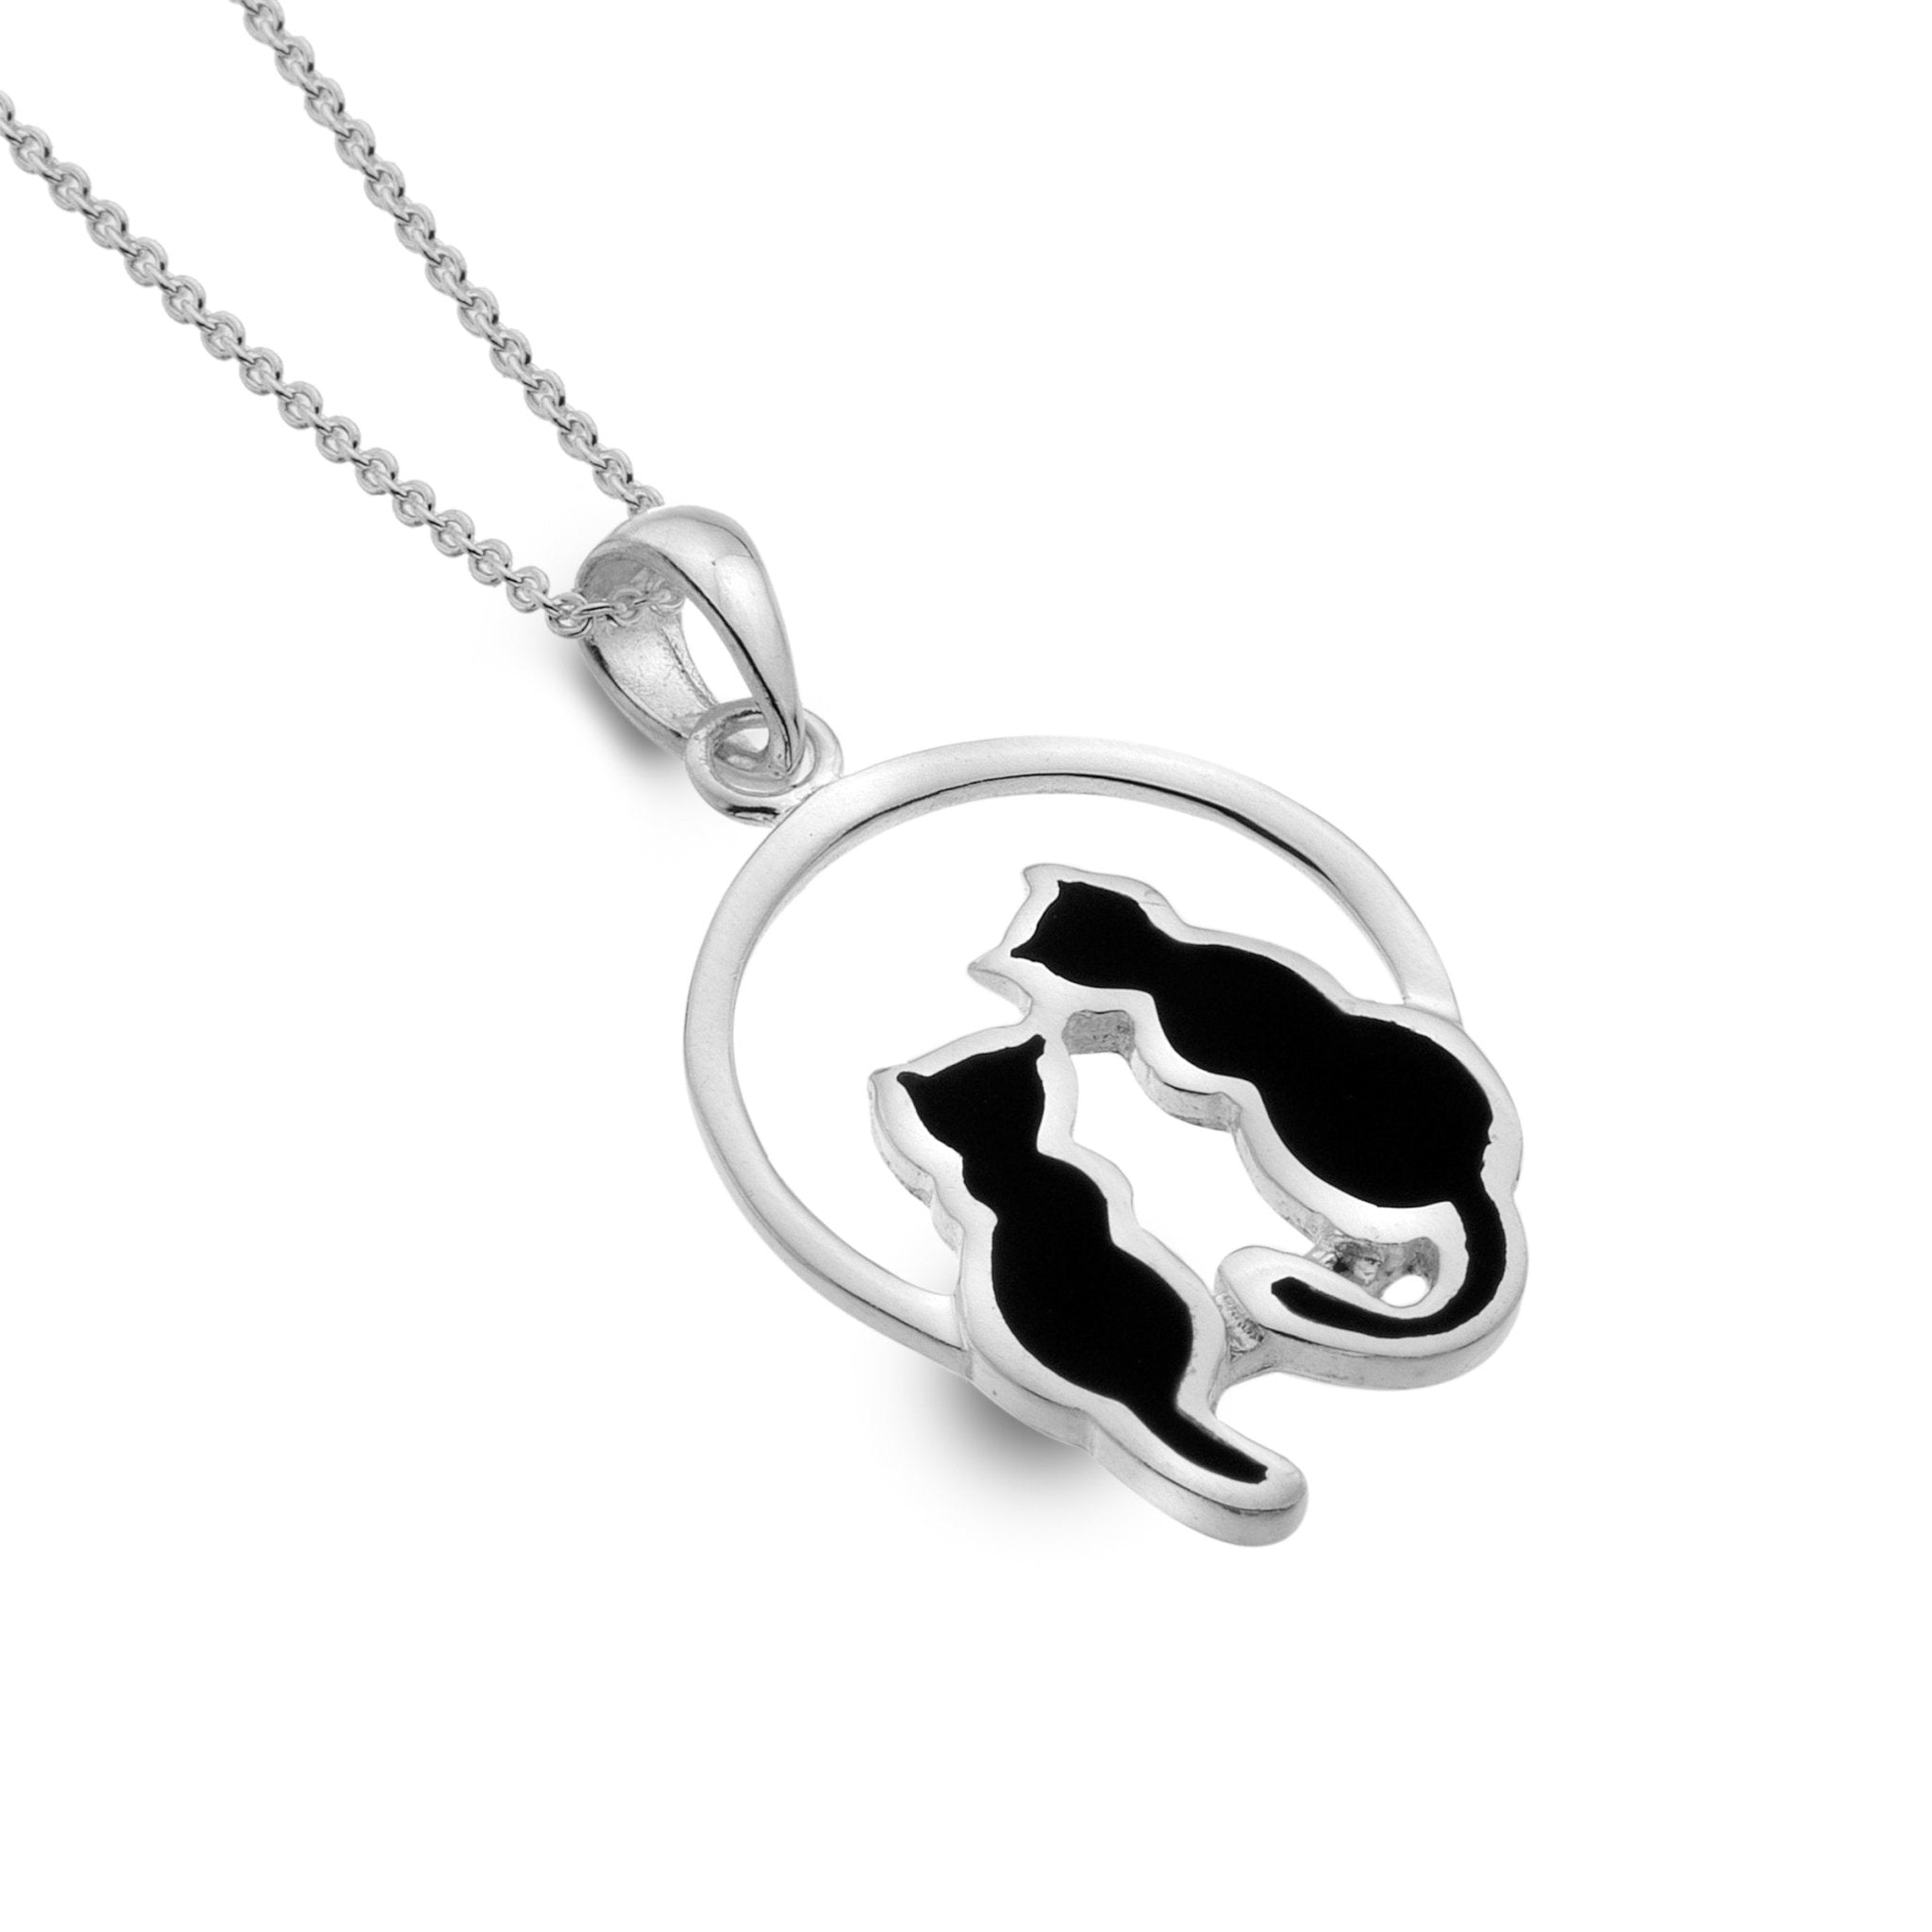 925 Silver Cat Name Engraving Diffuser Necklace - 2BN0064 - DearBell